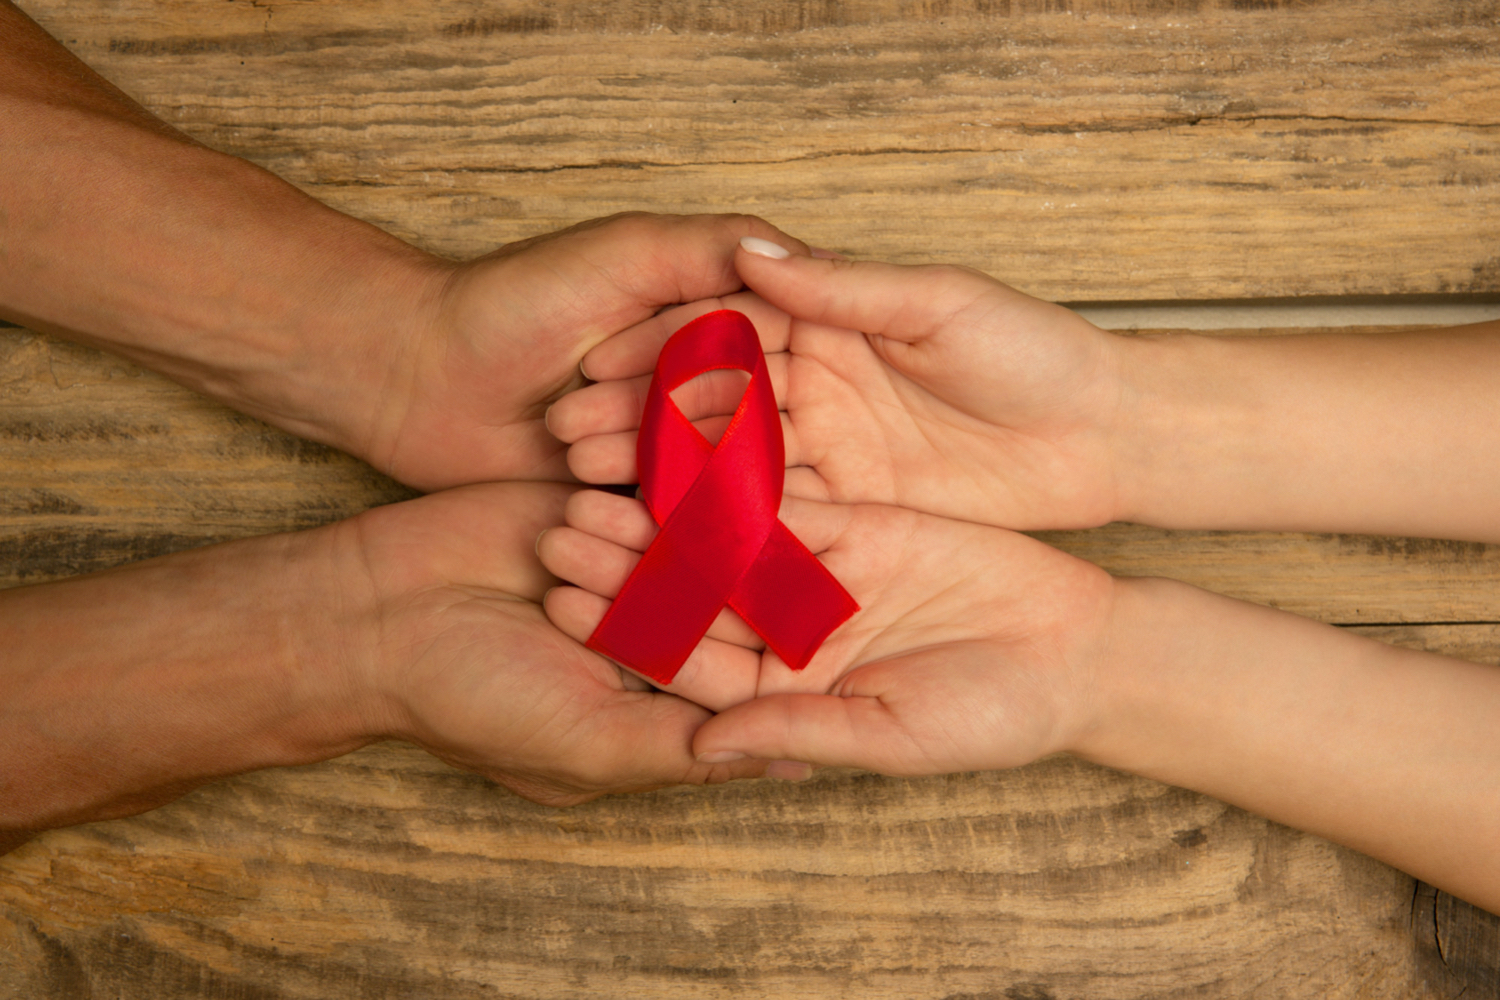 Female and male hands holding red HIV AIDS awareness ribbon.